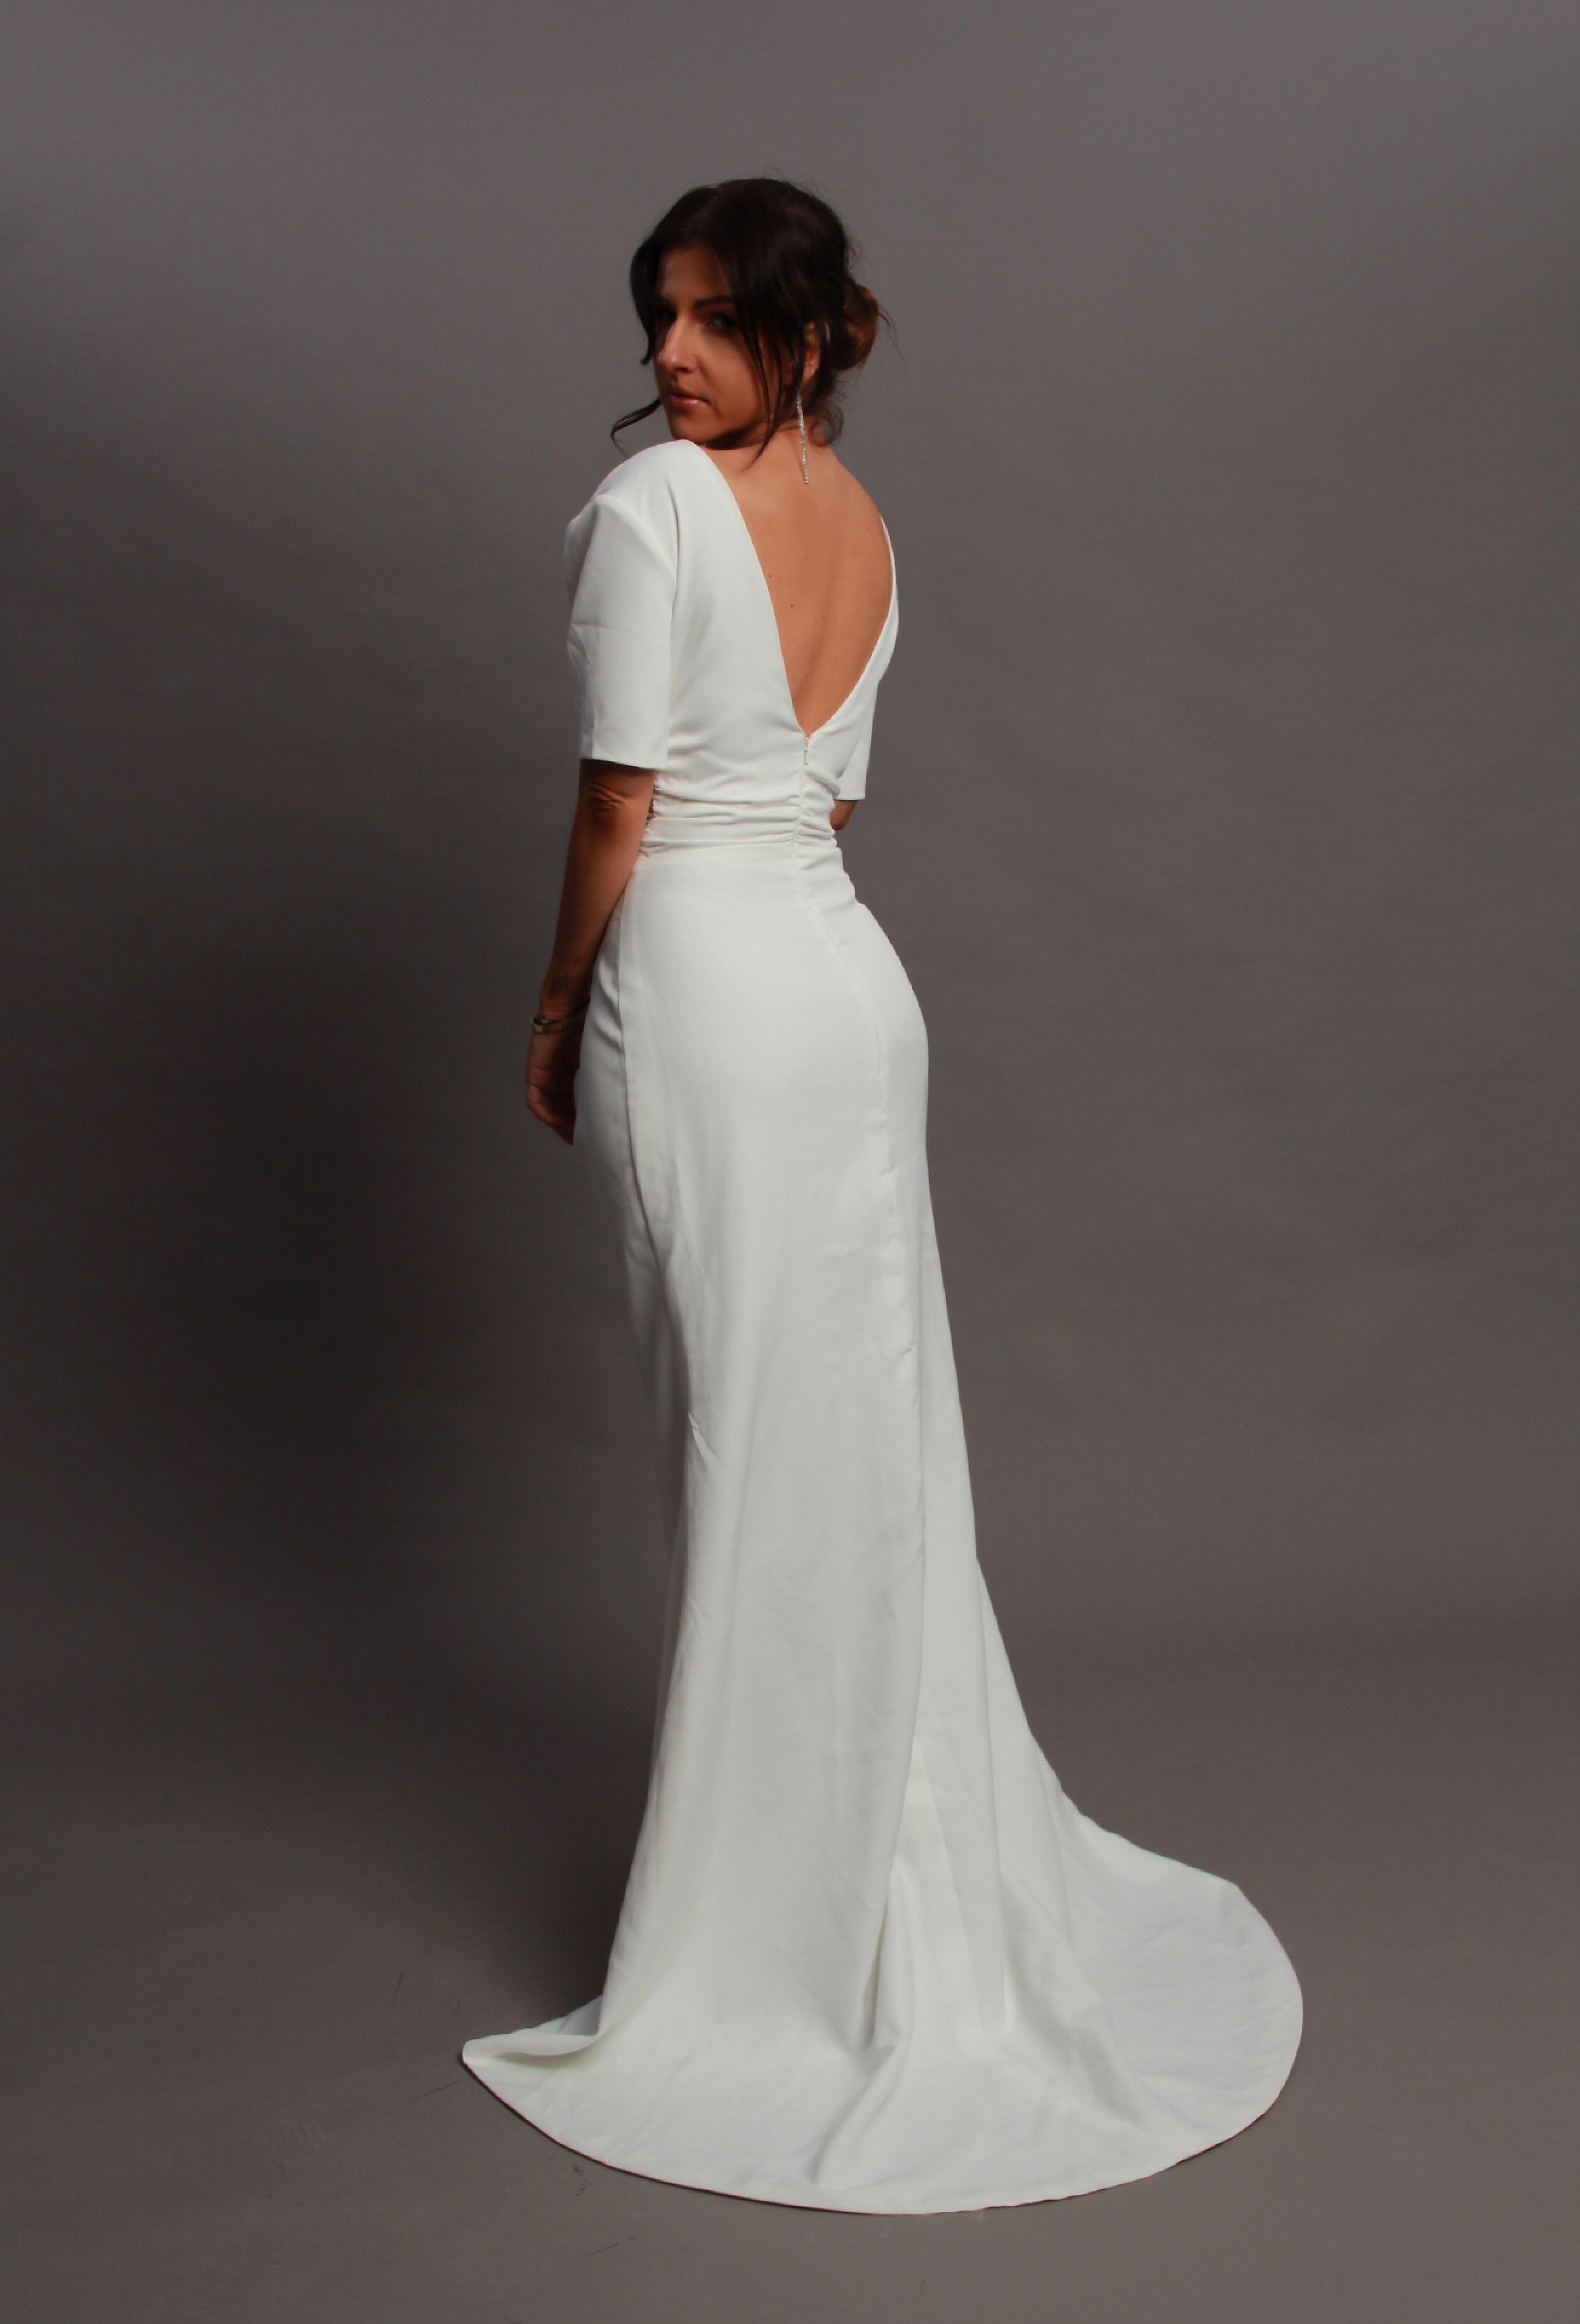 Try At Home - Crop Top Crepe Wedding Dress